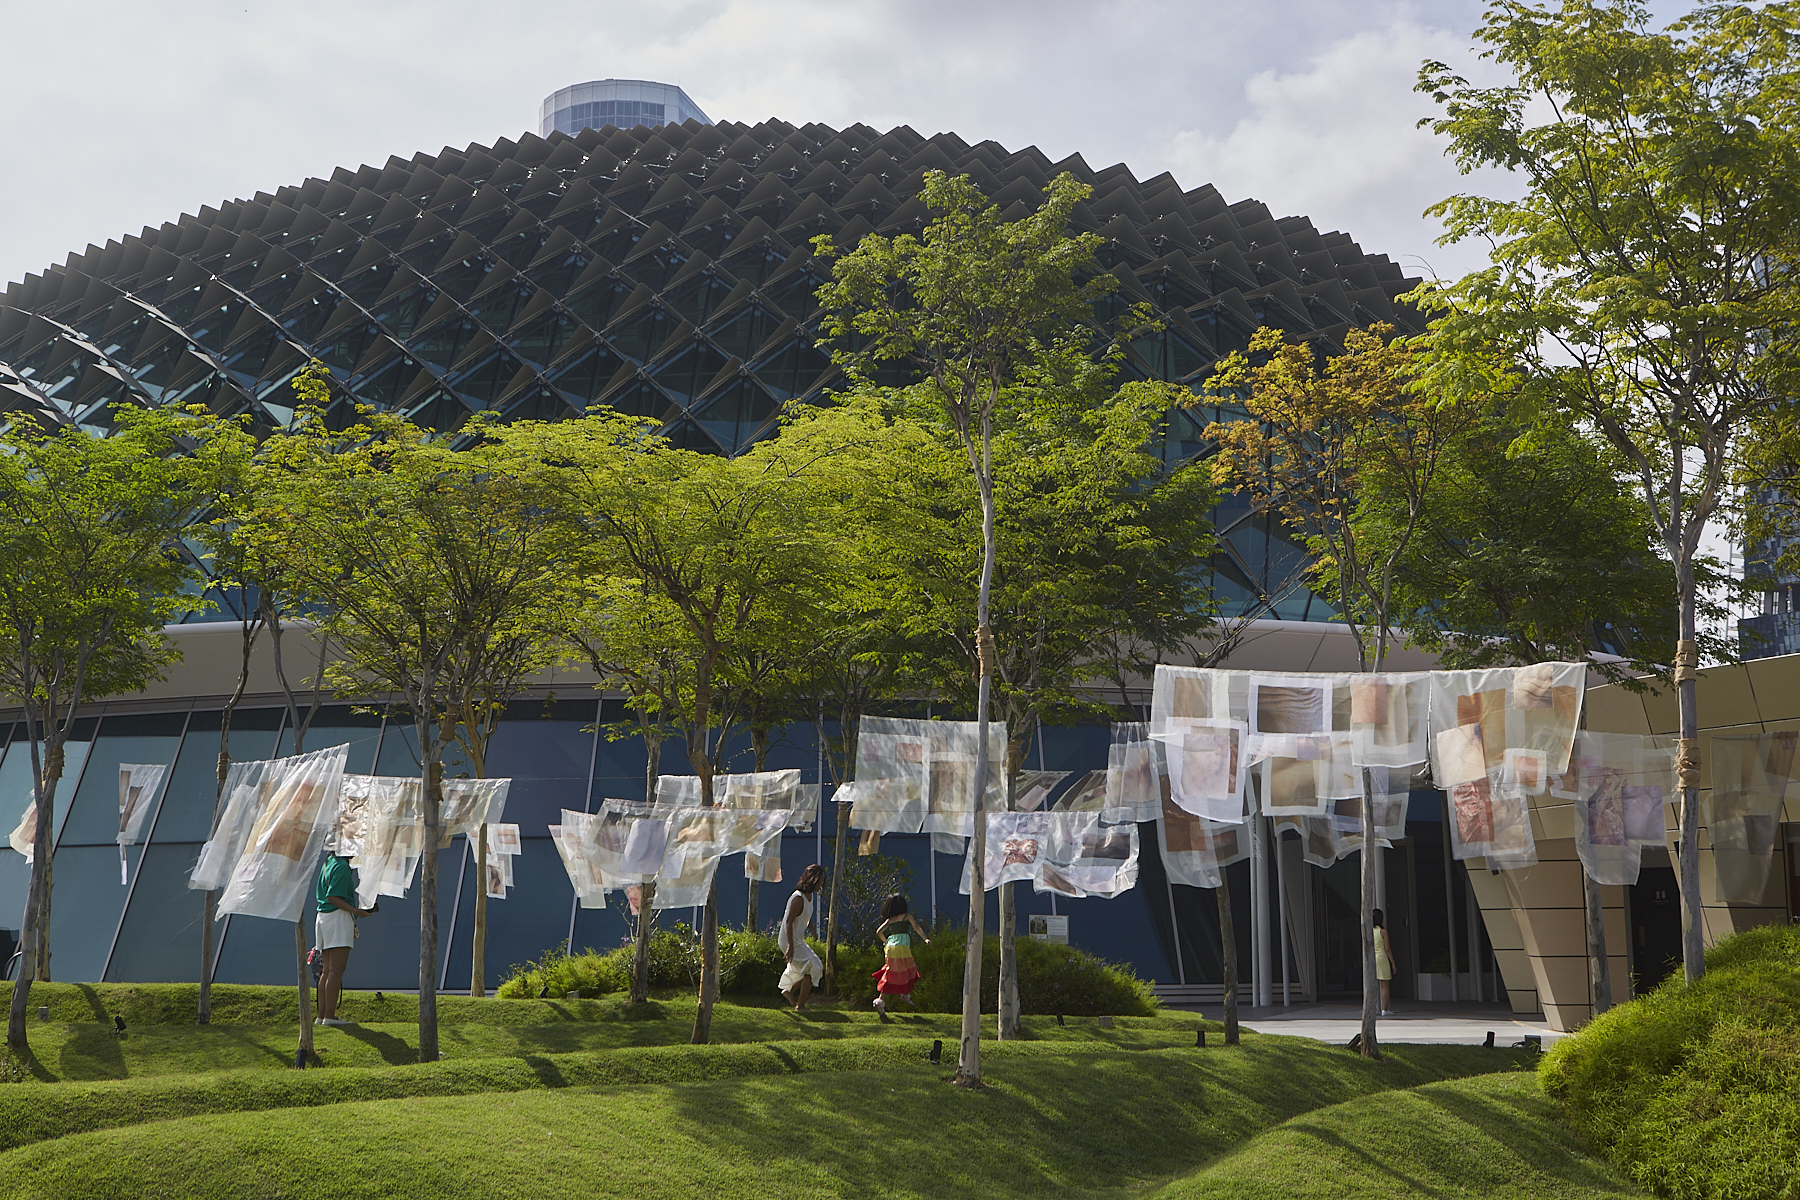 A view transparent neutral- coloured fabric installation hung across trees in front of a domed building - with Asian women and girl in the background